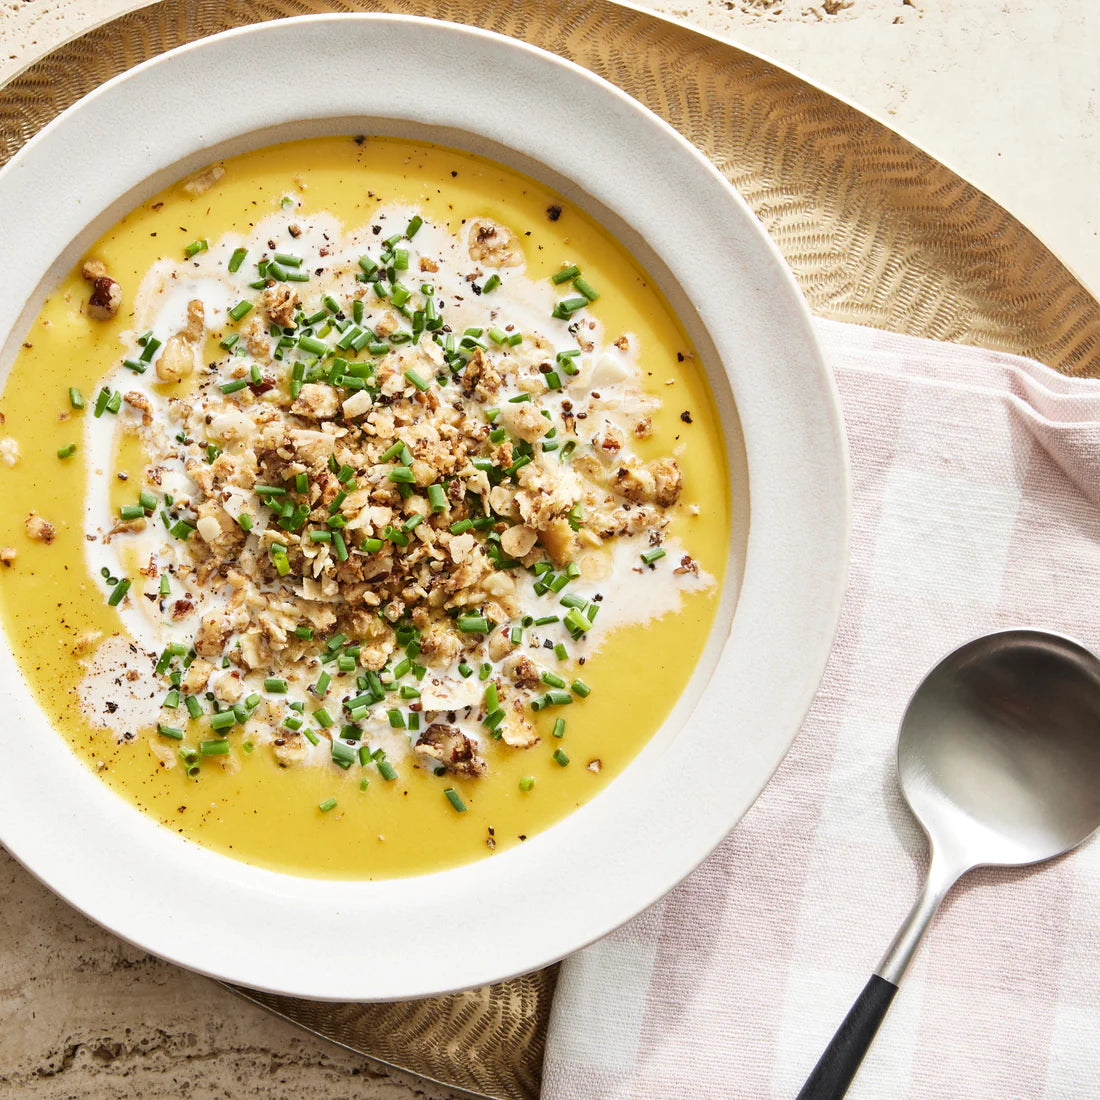 A comforting bowl of curried butternut squash bisque topped with Struesli granola.